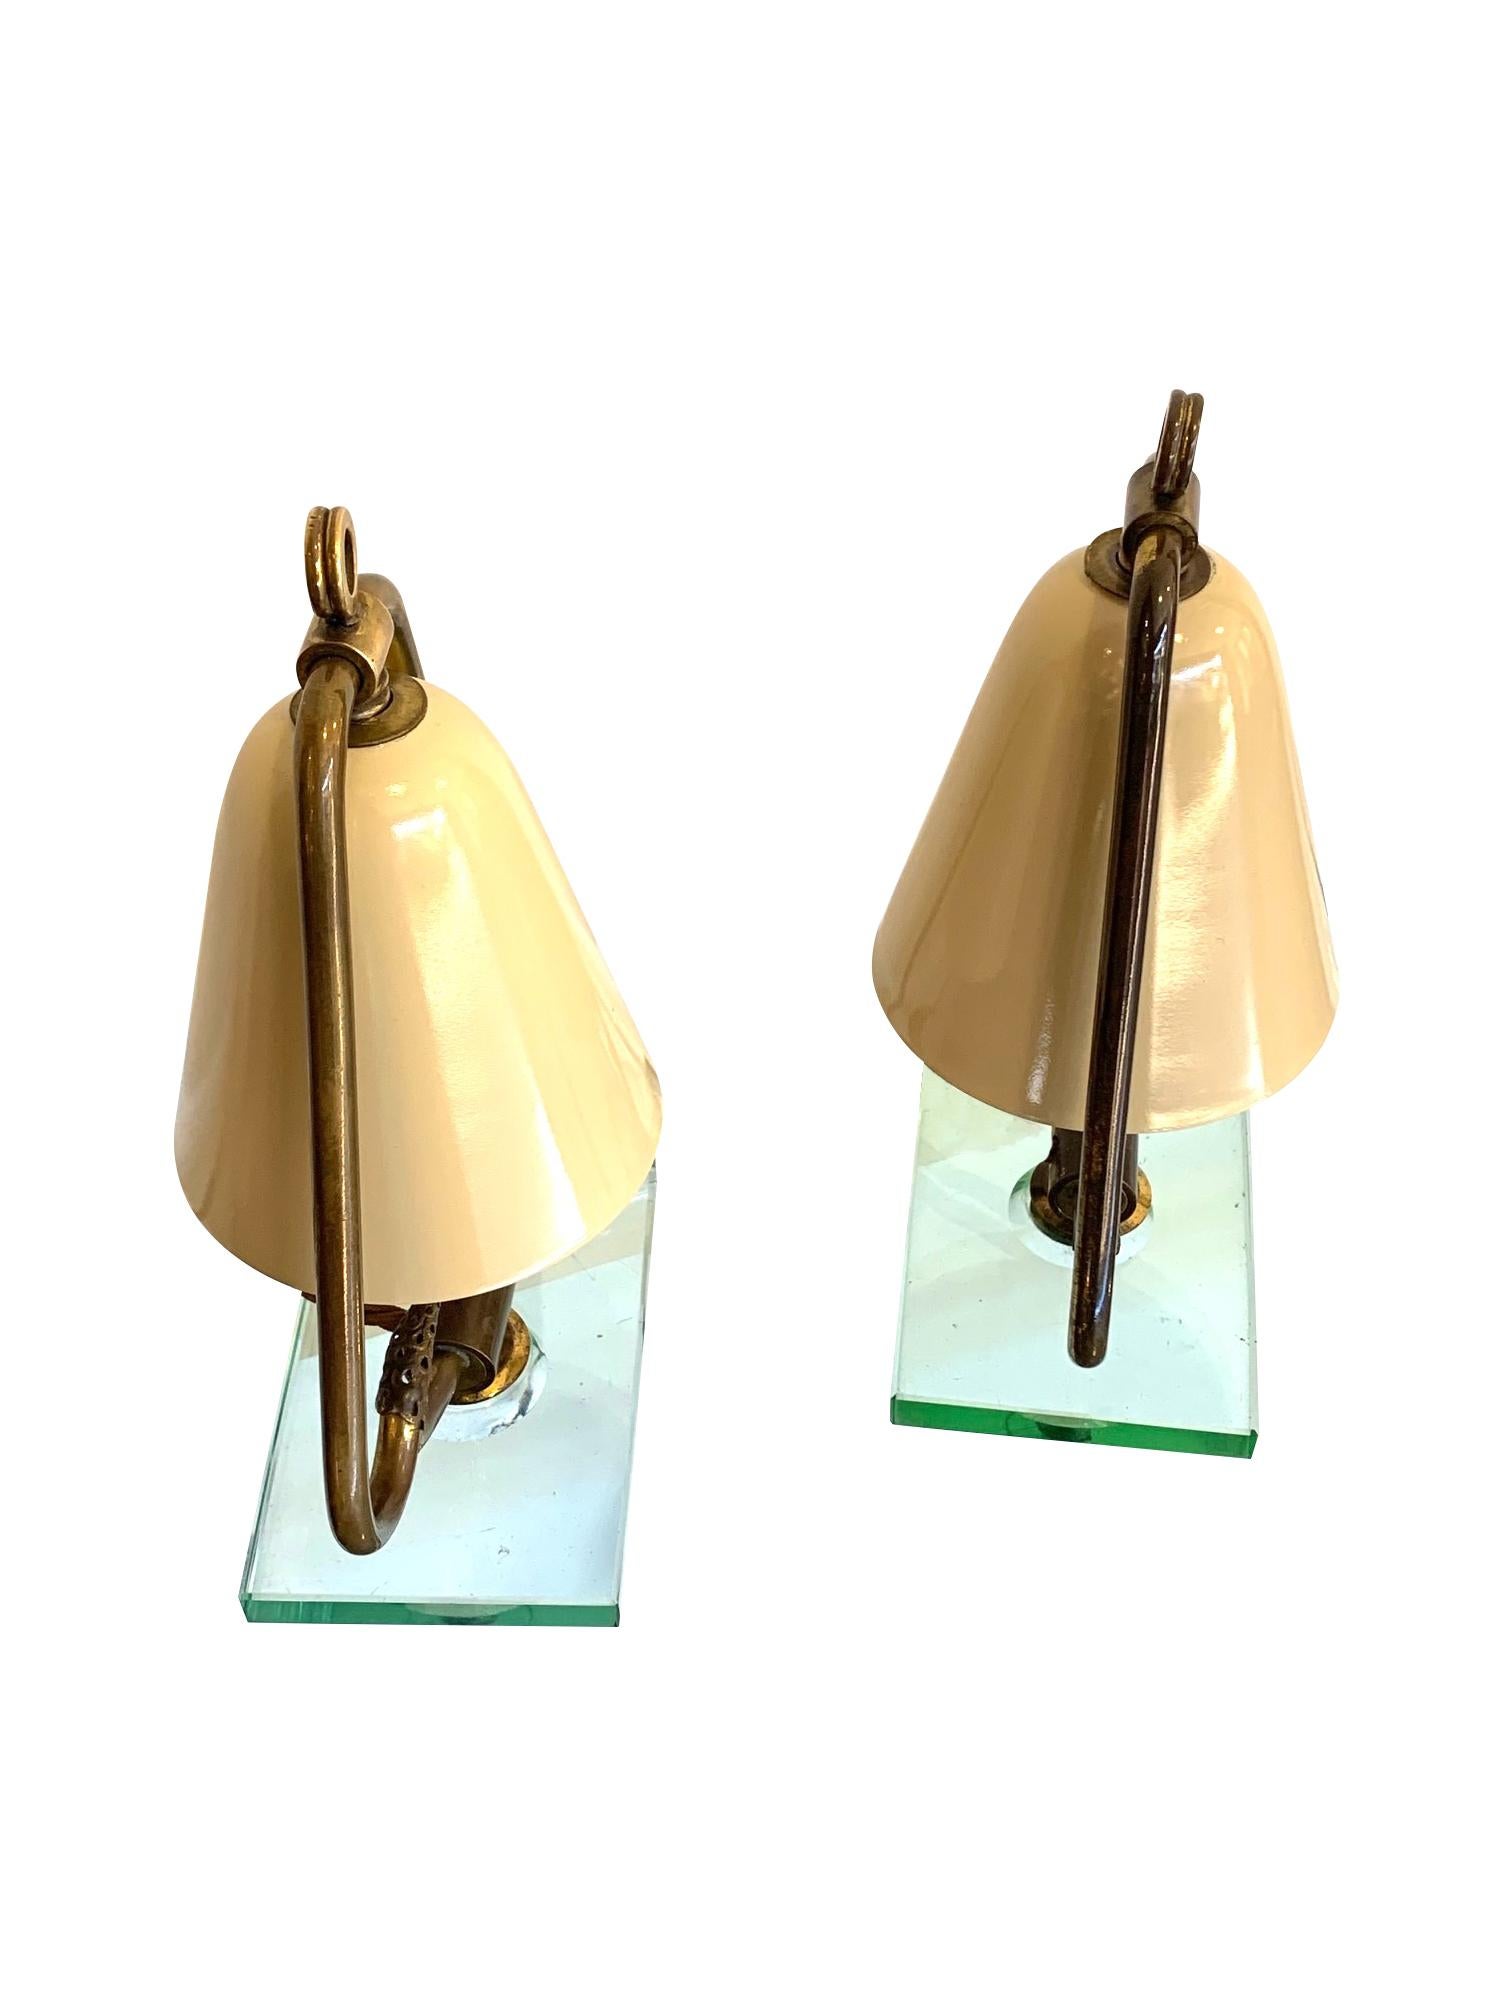 Pair of 1950s Italian Lamps with Enamel Shades on Brass Frame Mounted on Glass 5